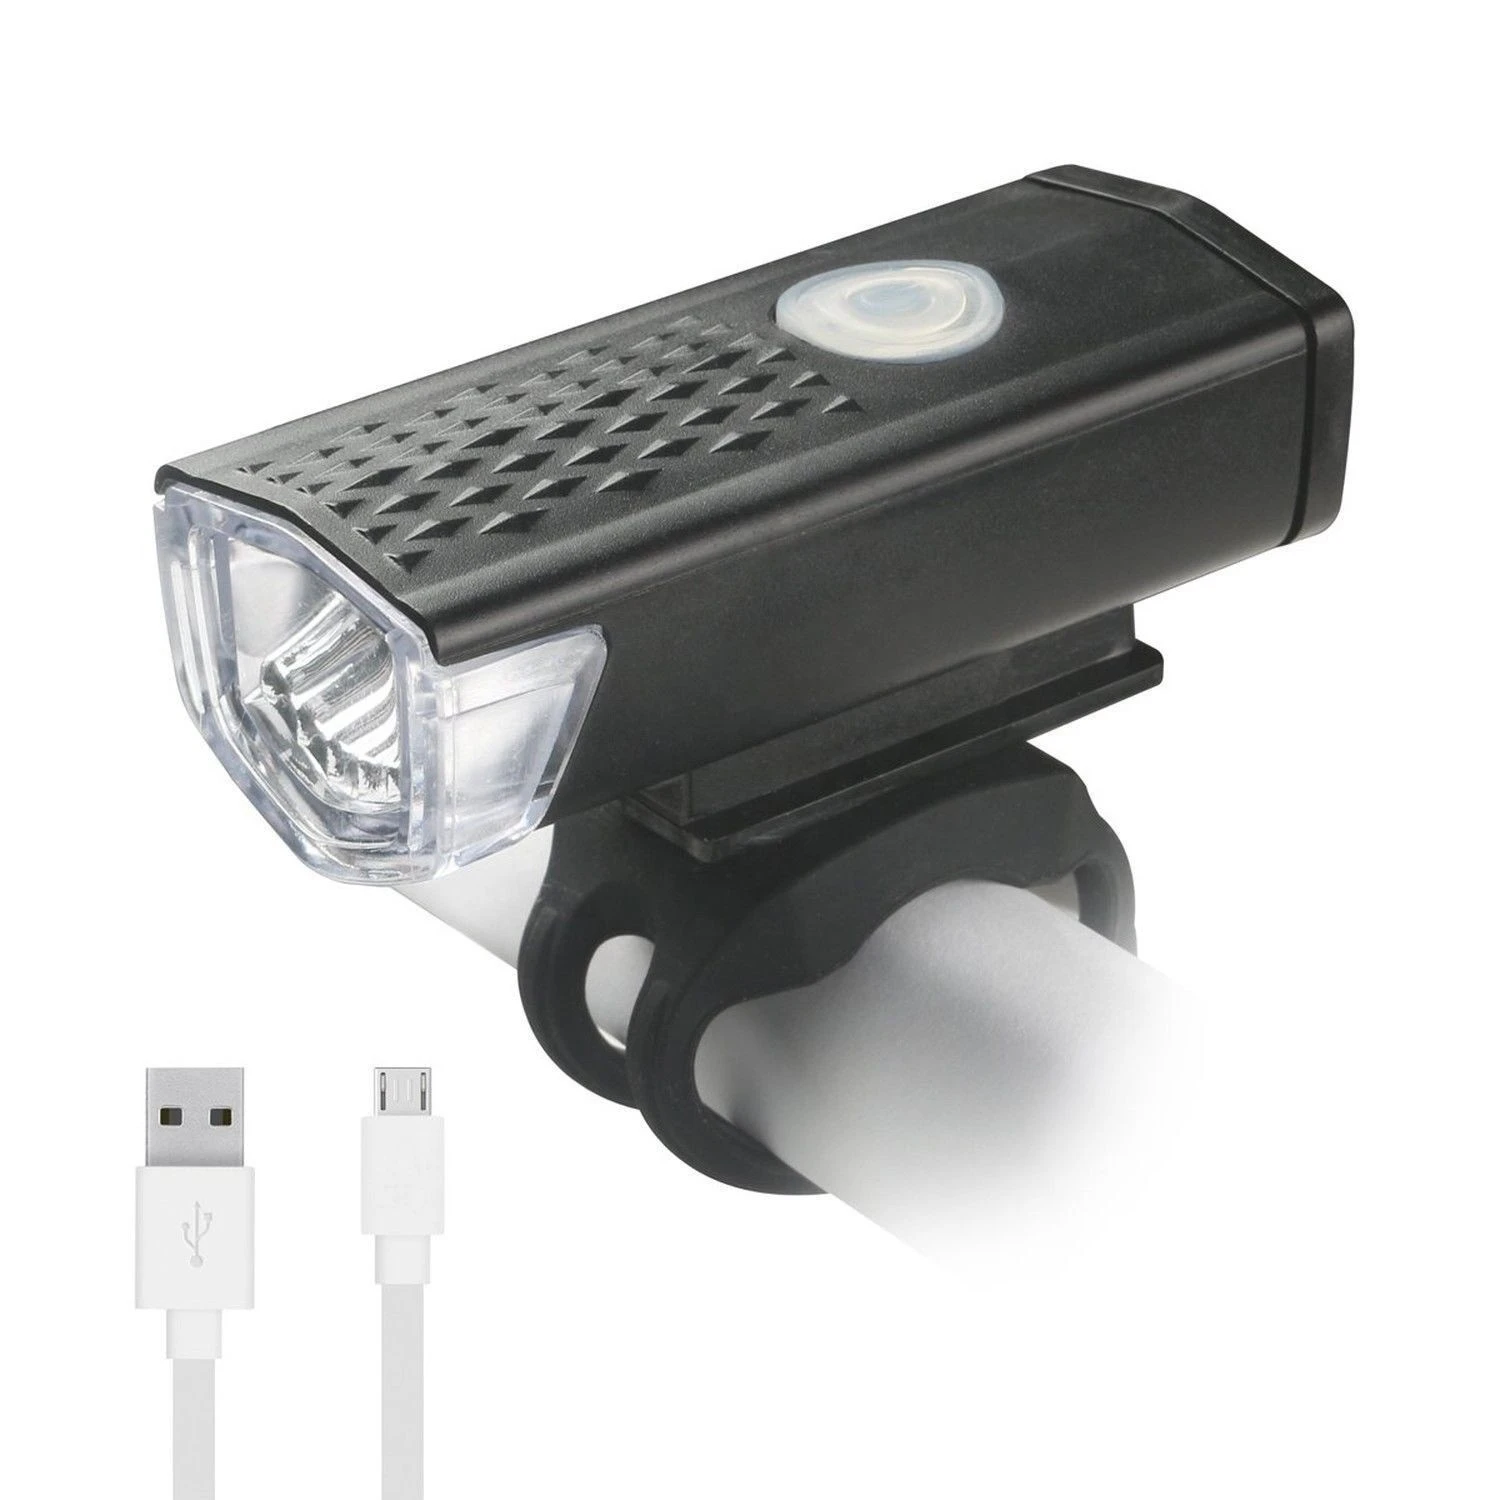 Hot Sell LED Bicycle Light / Front Bike Lights